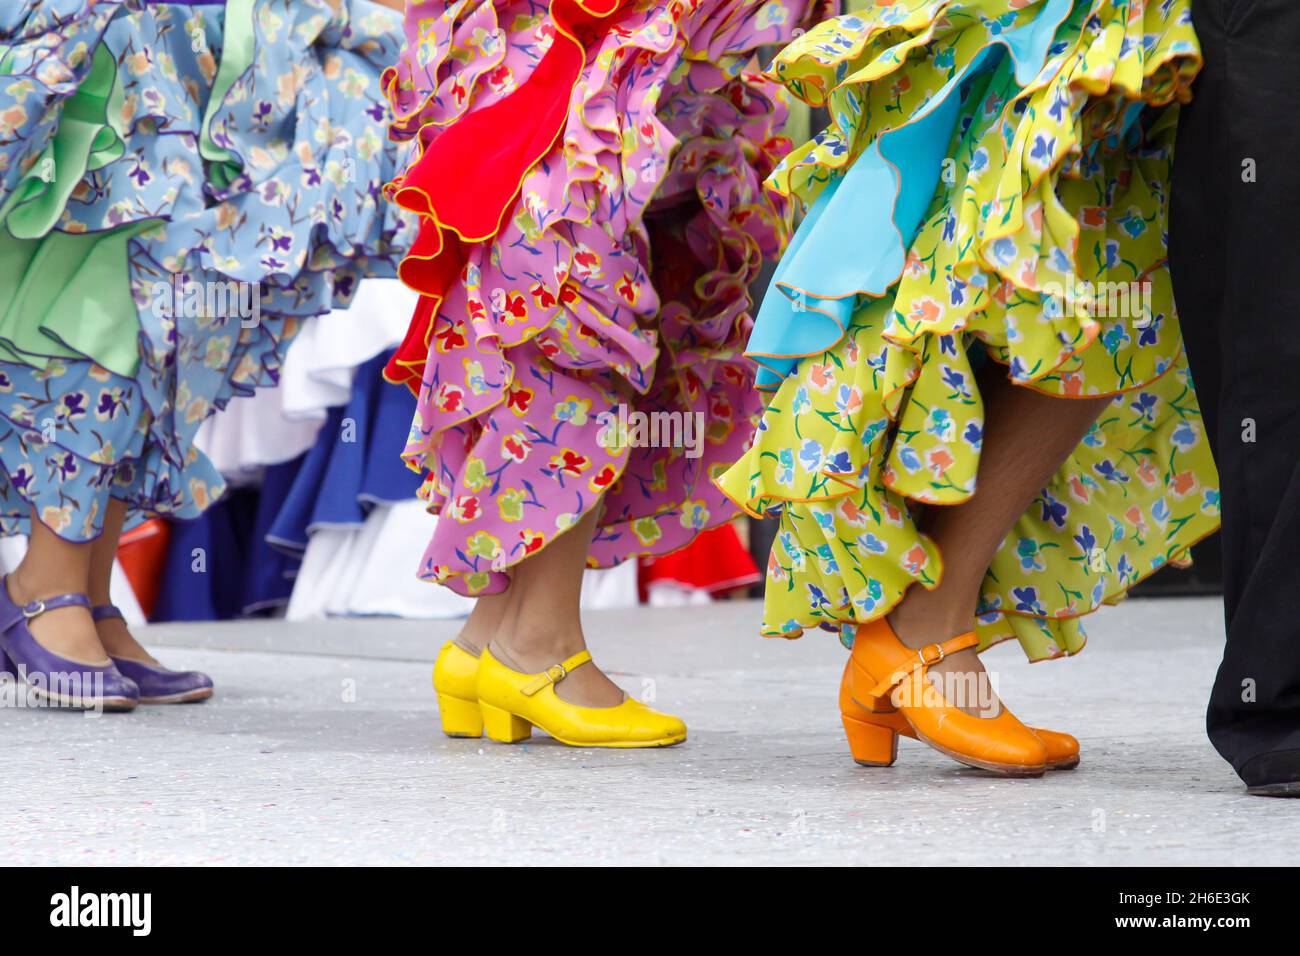 Flamenco dancers in colorful costumes Stock Photo